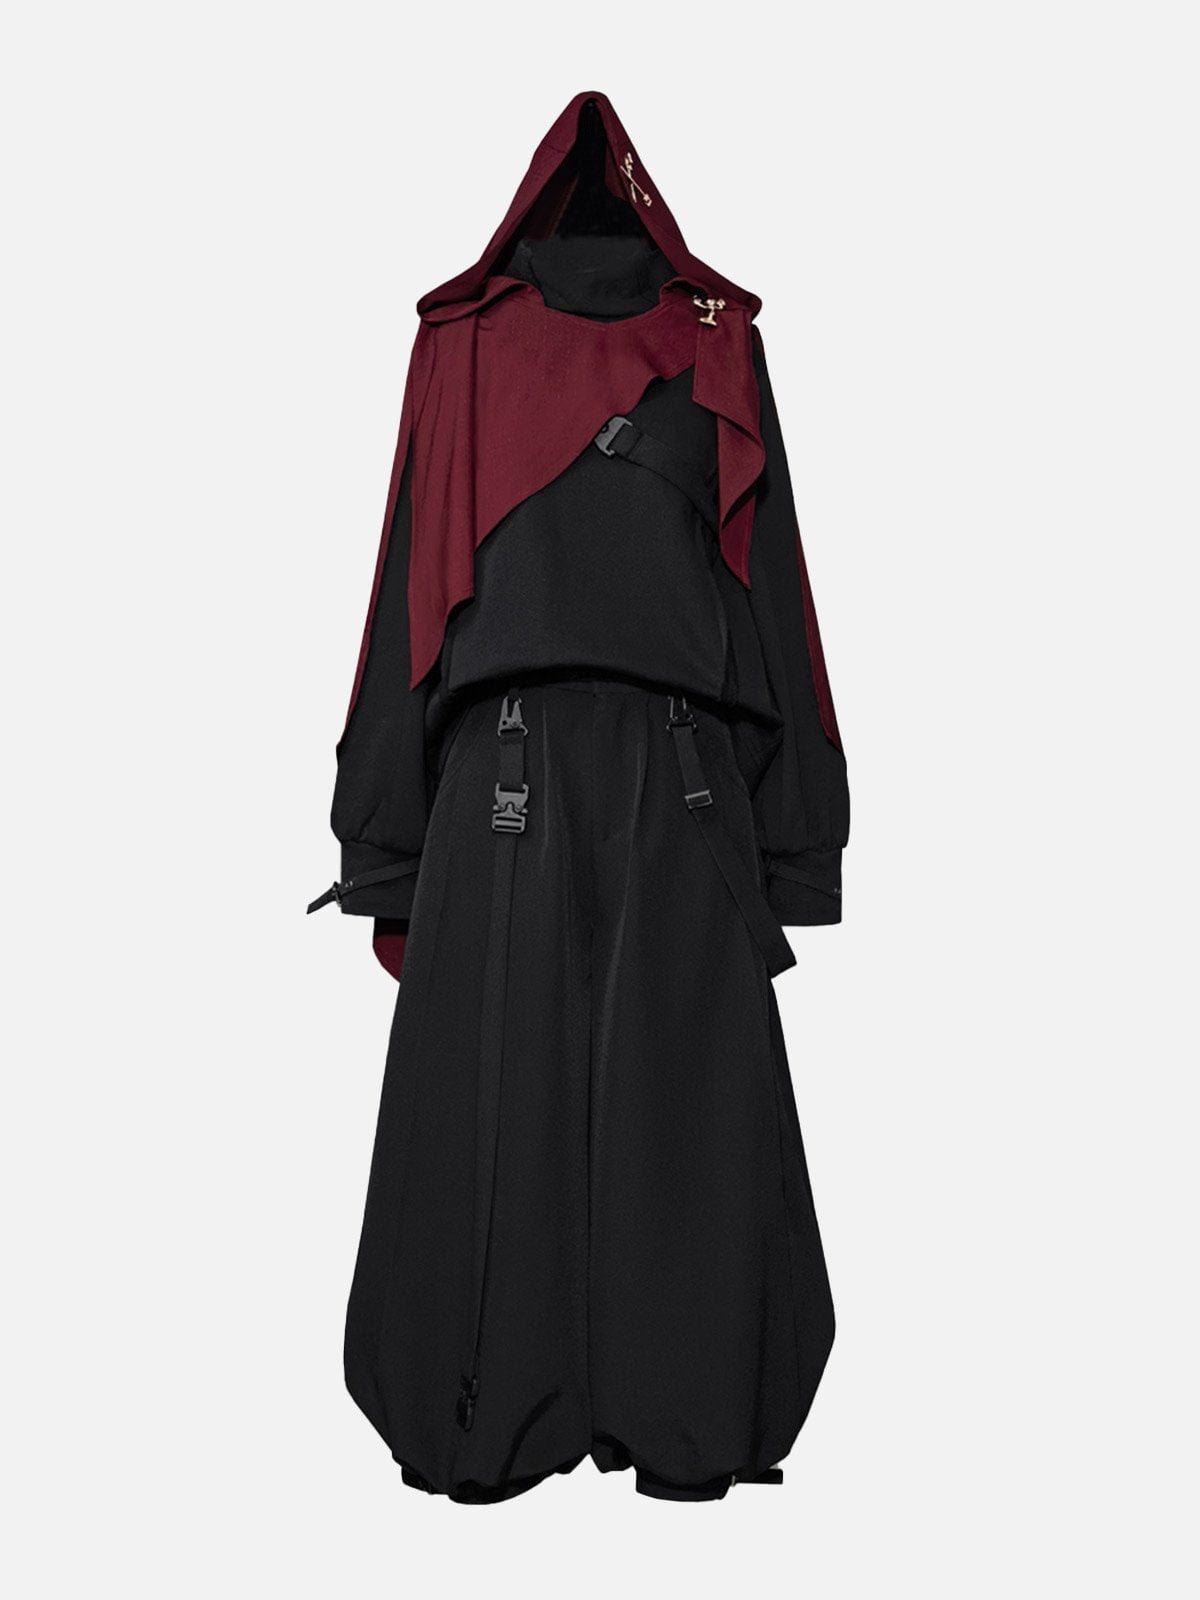 NEV Mystical Cool Hooded Cape